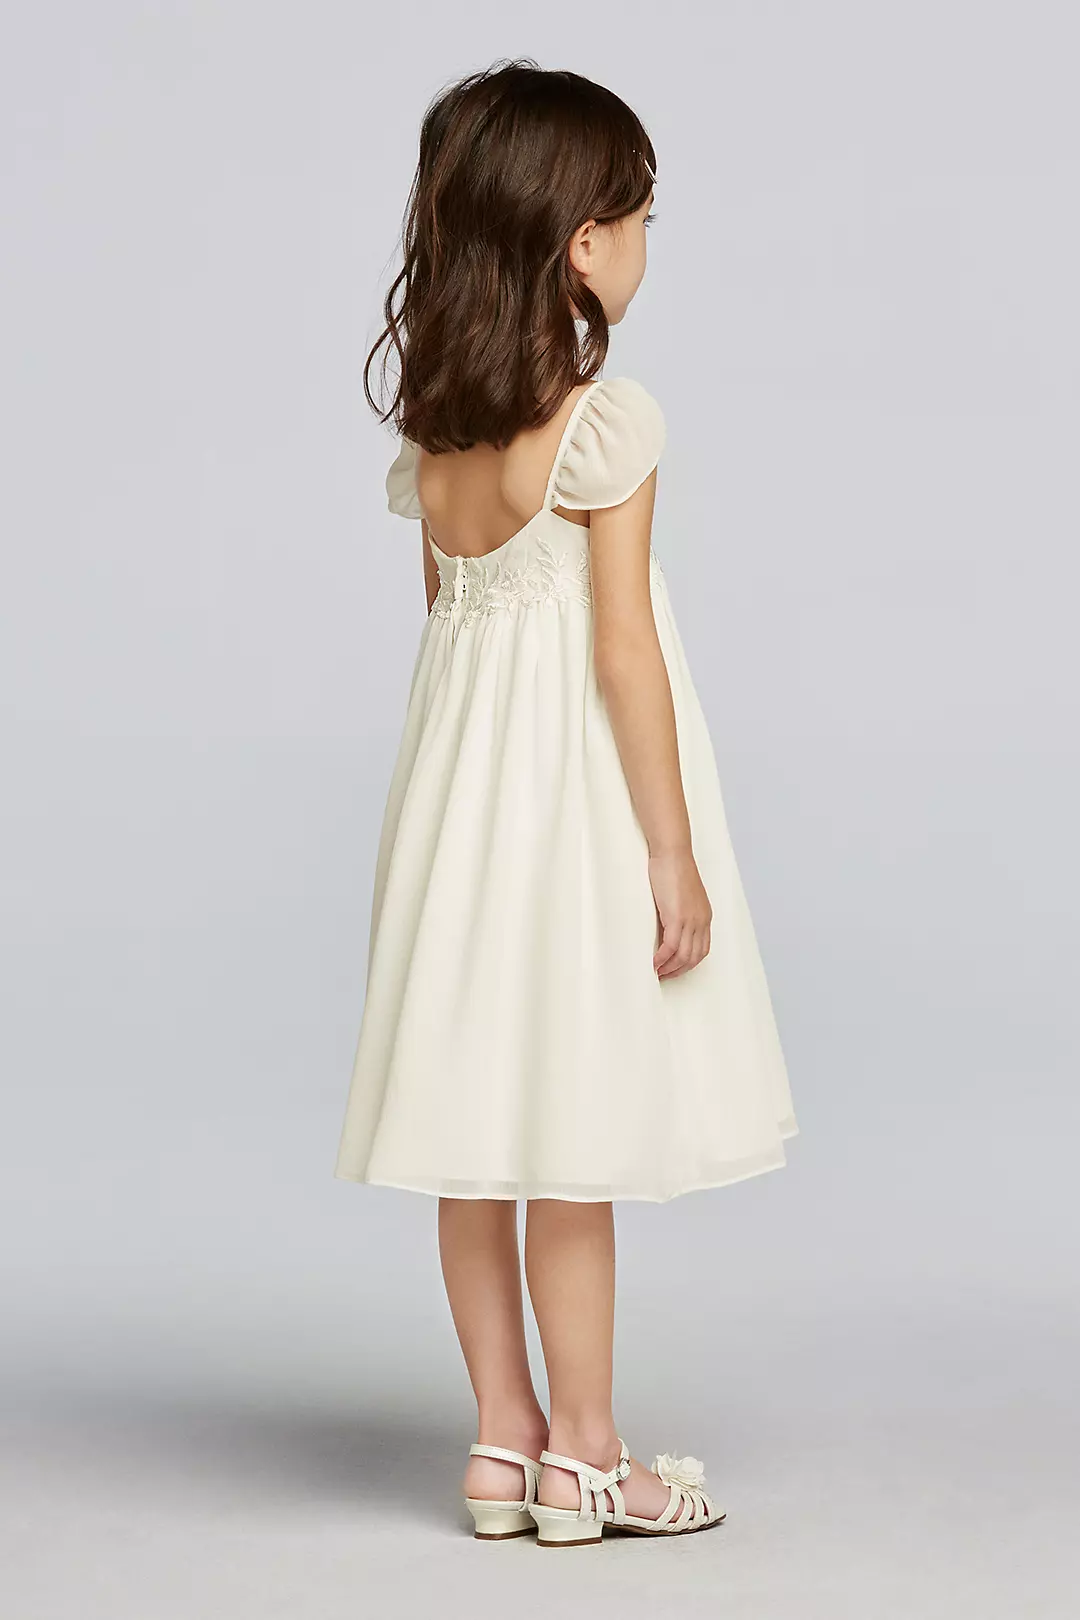 Chiffon Flower Girl Dress with Cap Sleeves Image 2